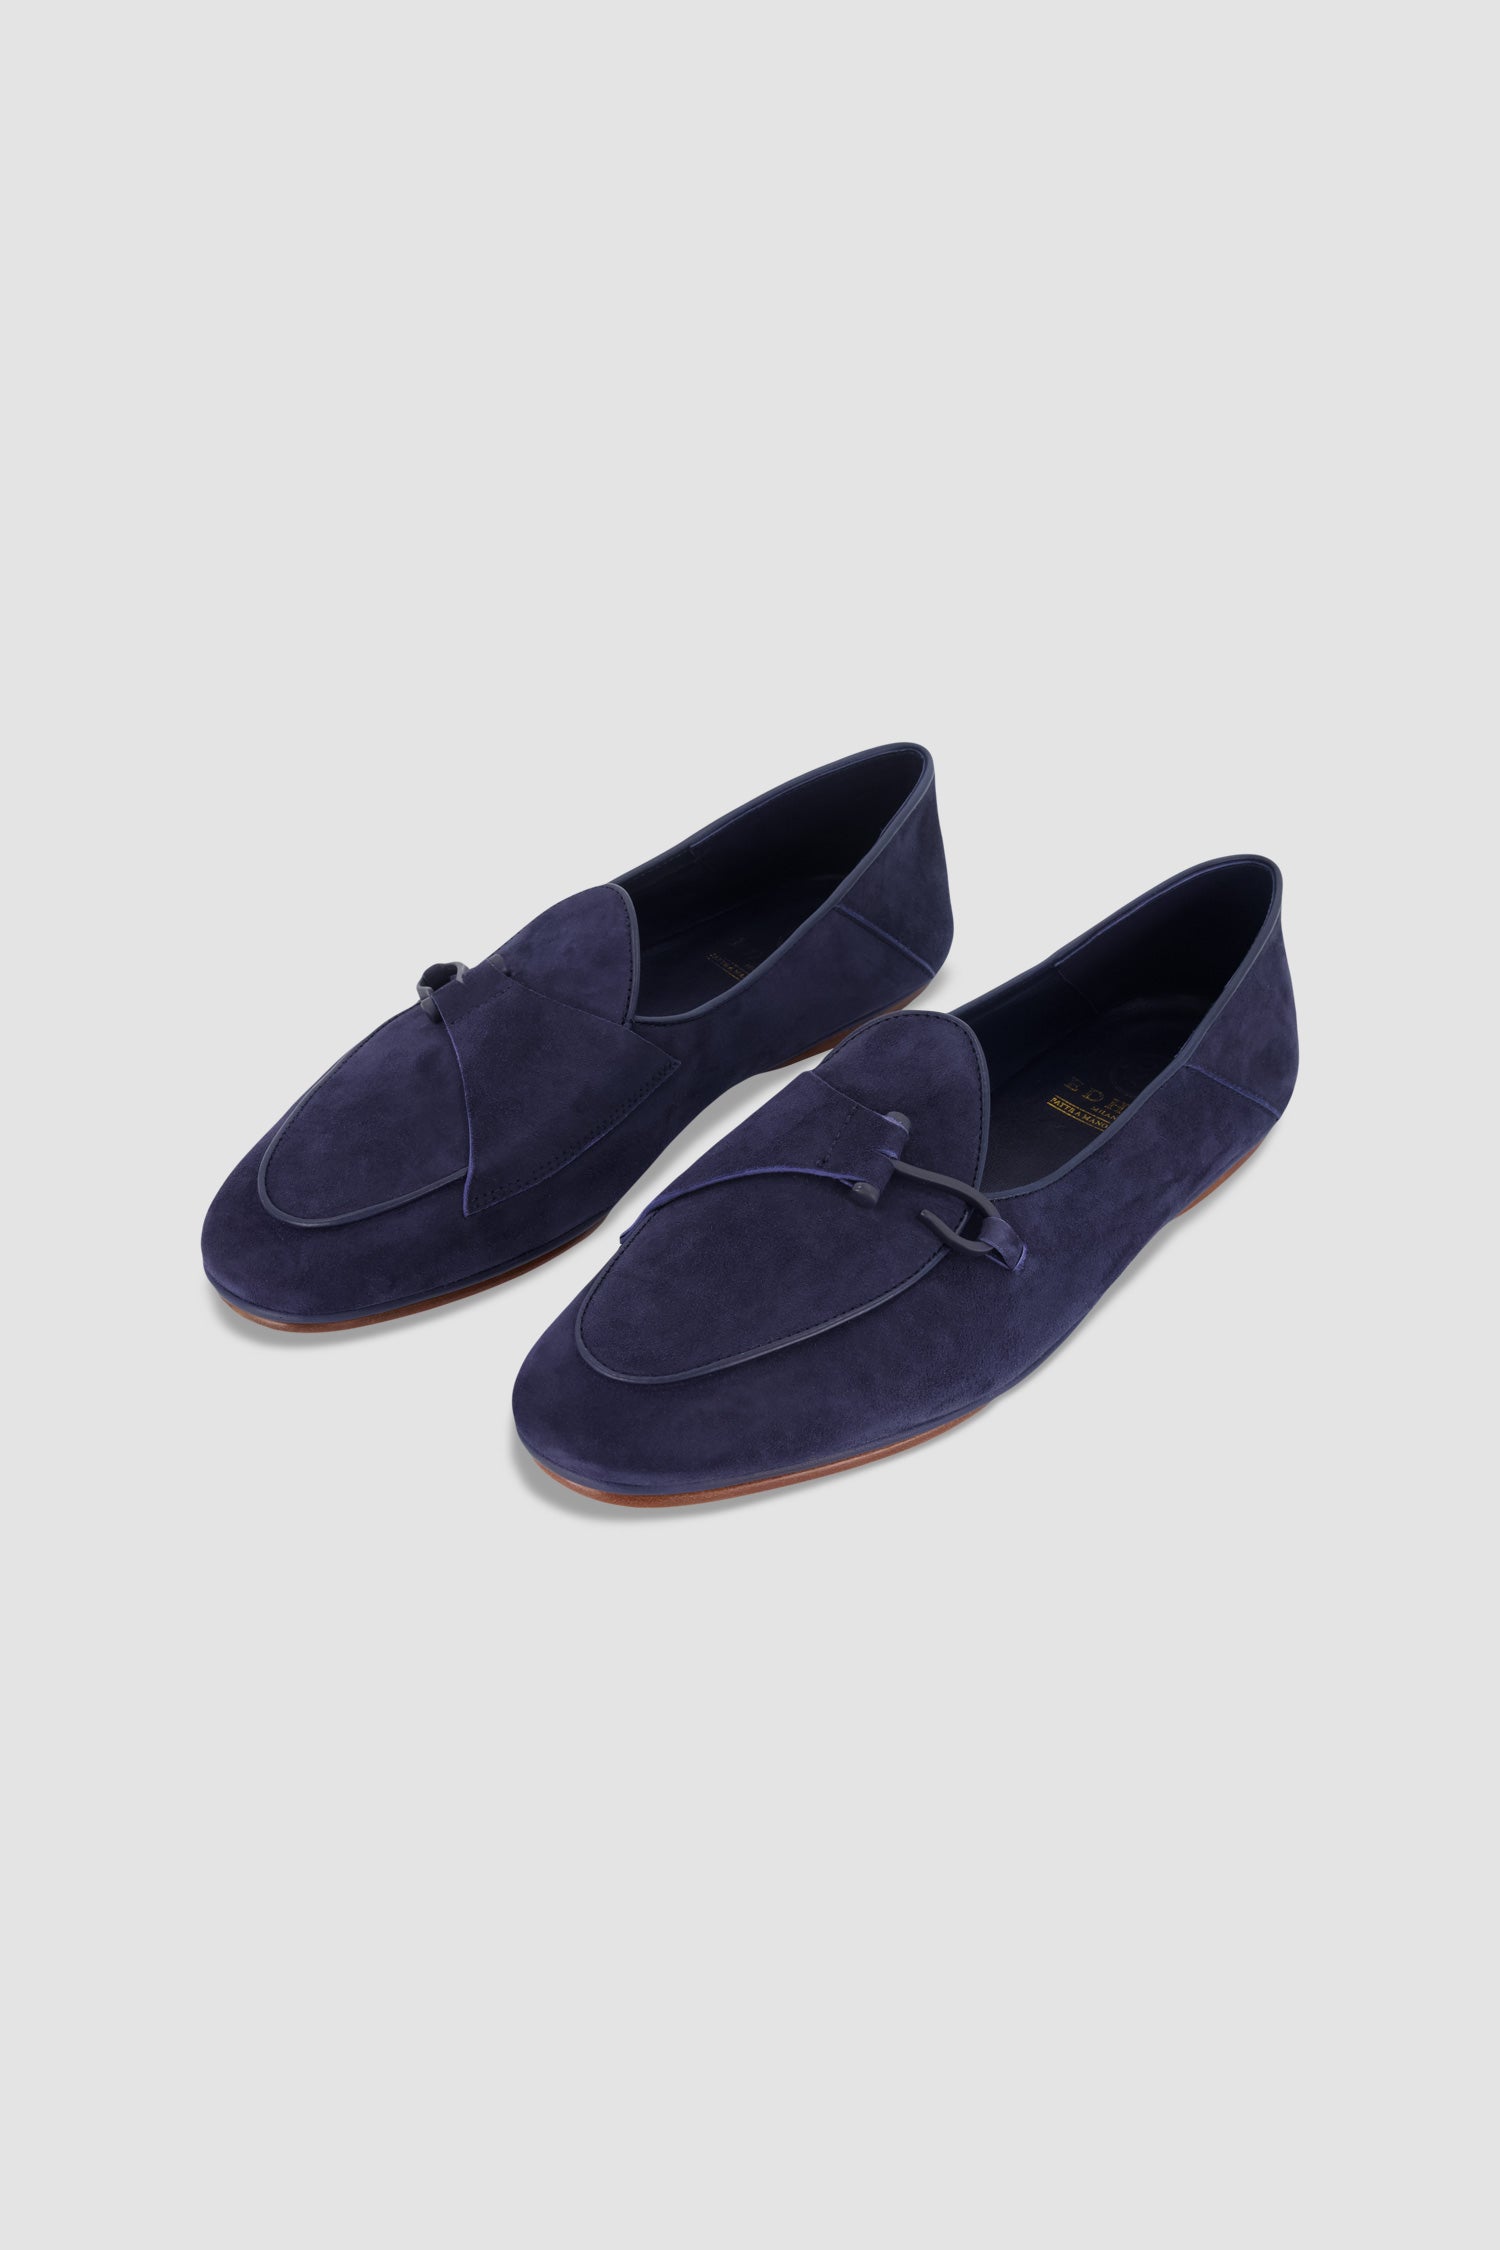 Edhen Milano Comporta Fly Blue Suede Loafers